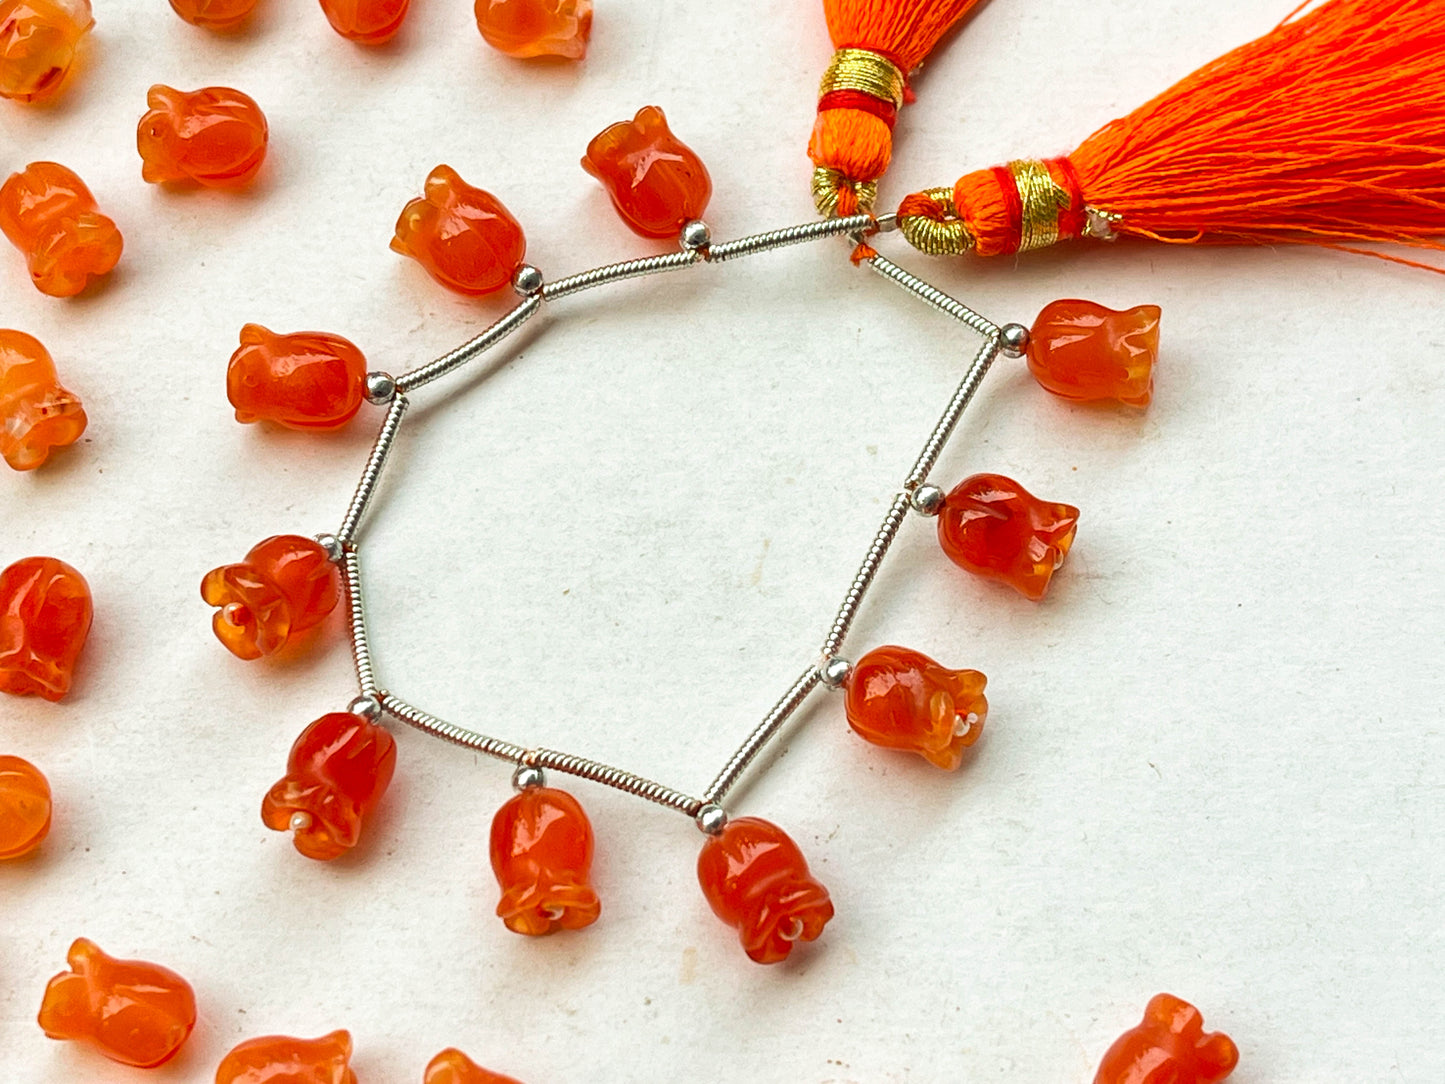 Carnelian flower carving Lily of the valley shape beads Beadsforyourjewelry